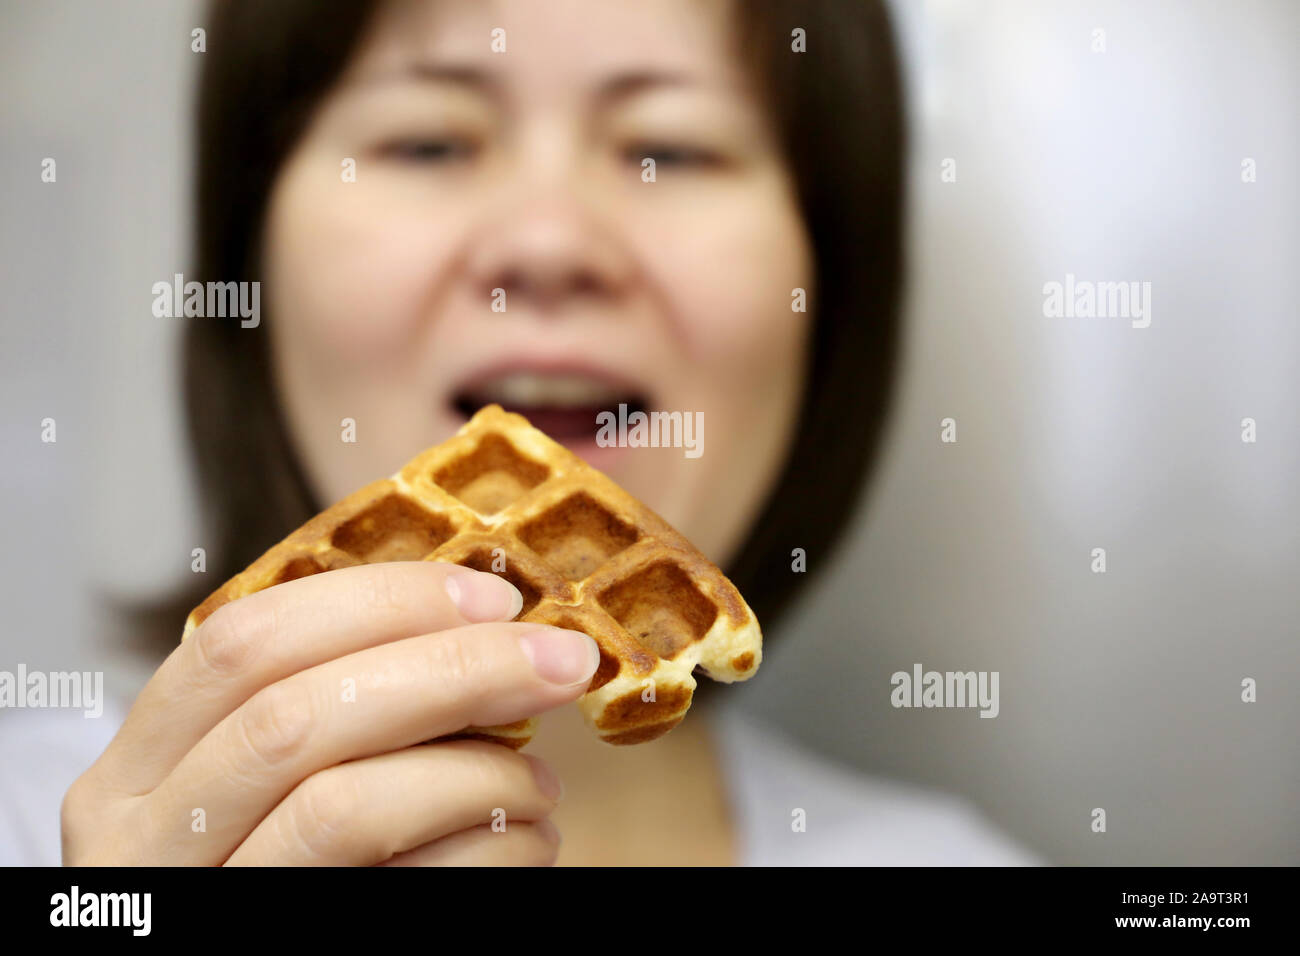 Diet and gluttony, woman eating belgian waffle, selective focus. Tasty breakfast close up, concept of temptation by delicious food, sweet tooth Stock Photo